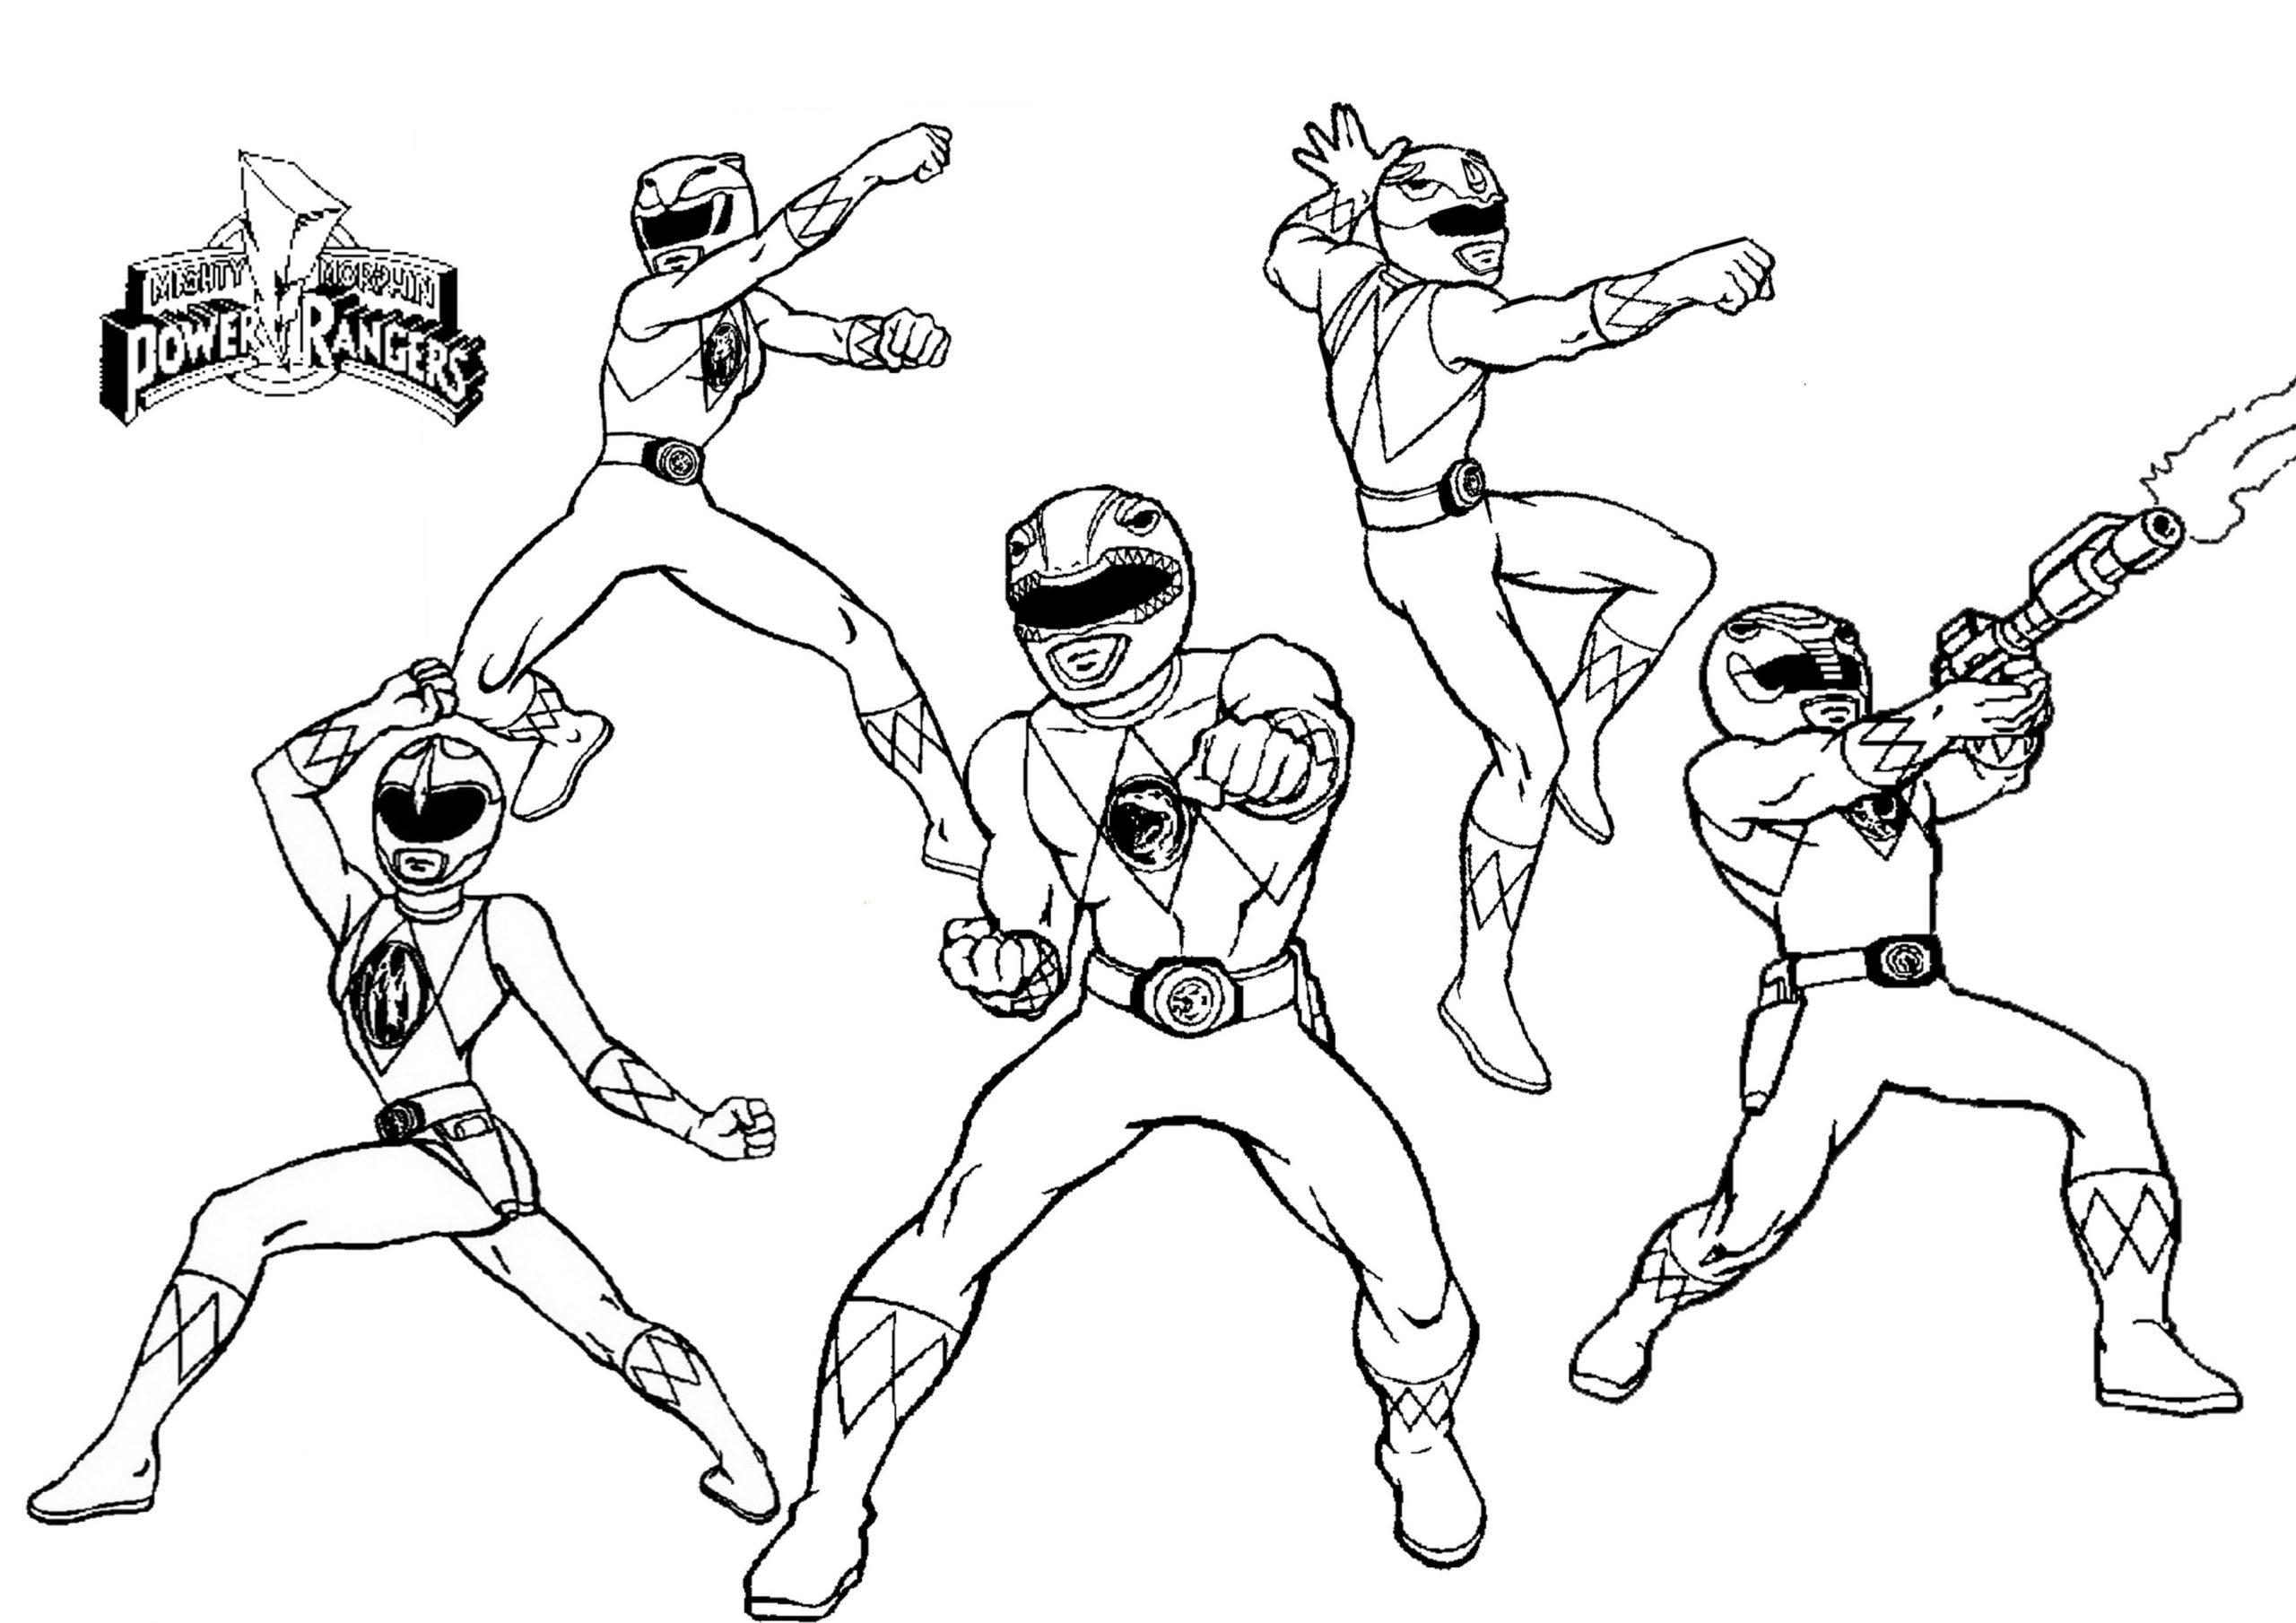 pages coloring ~ Phenomenal Red Ranger Coloring Page Image ...